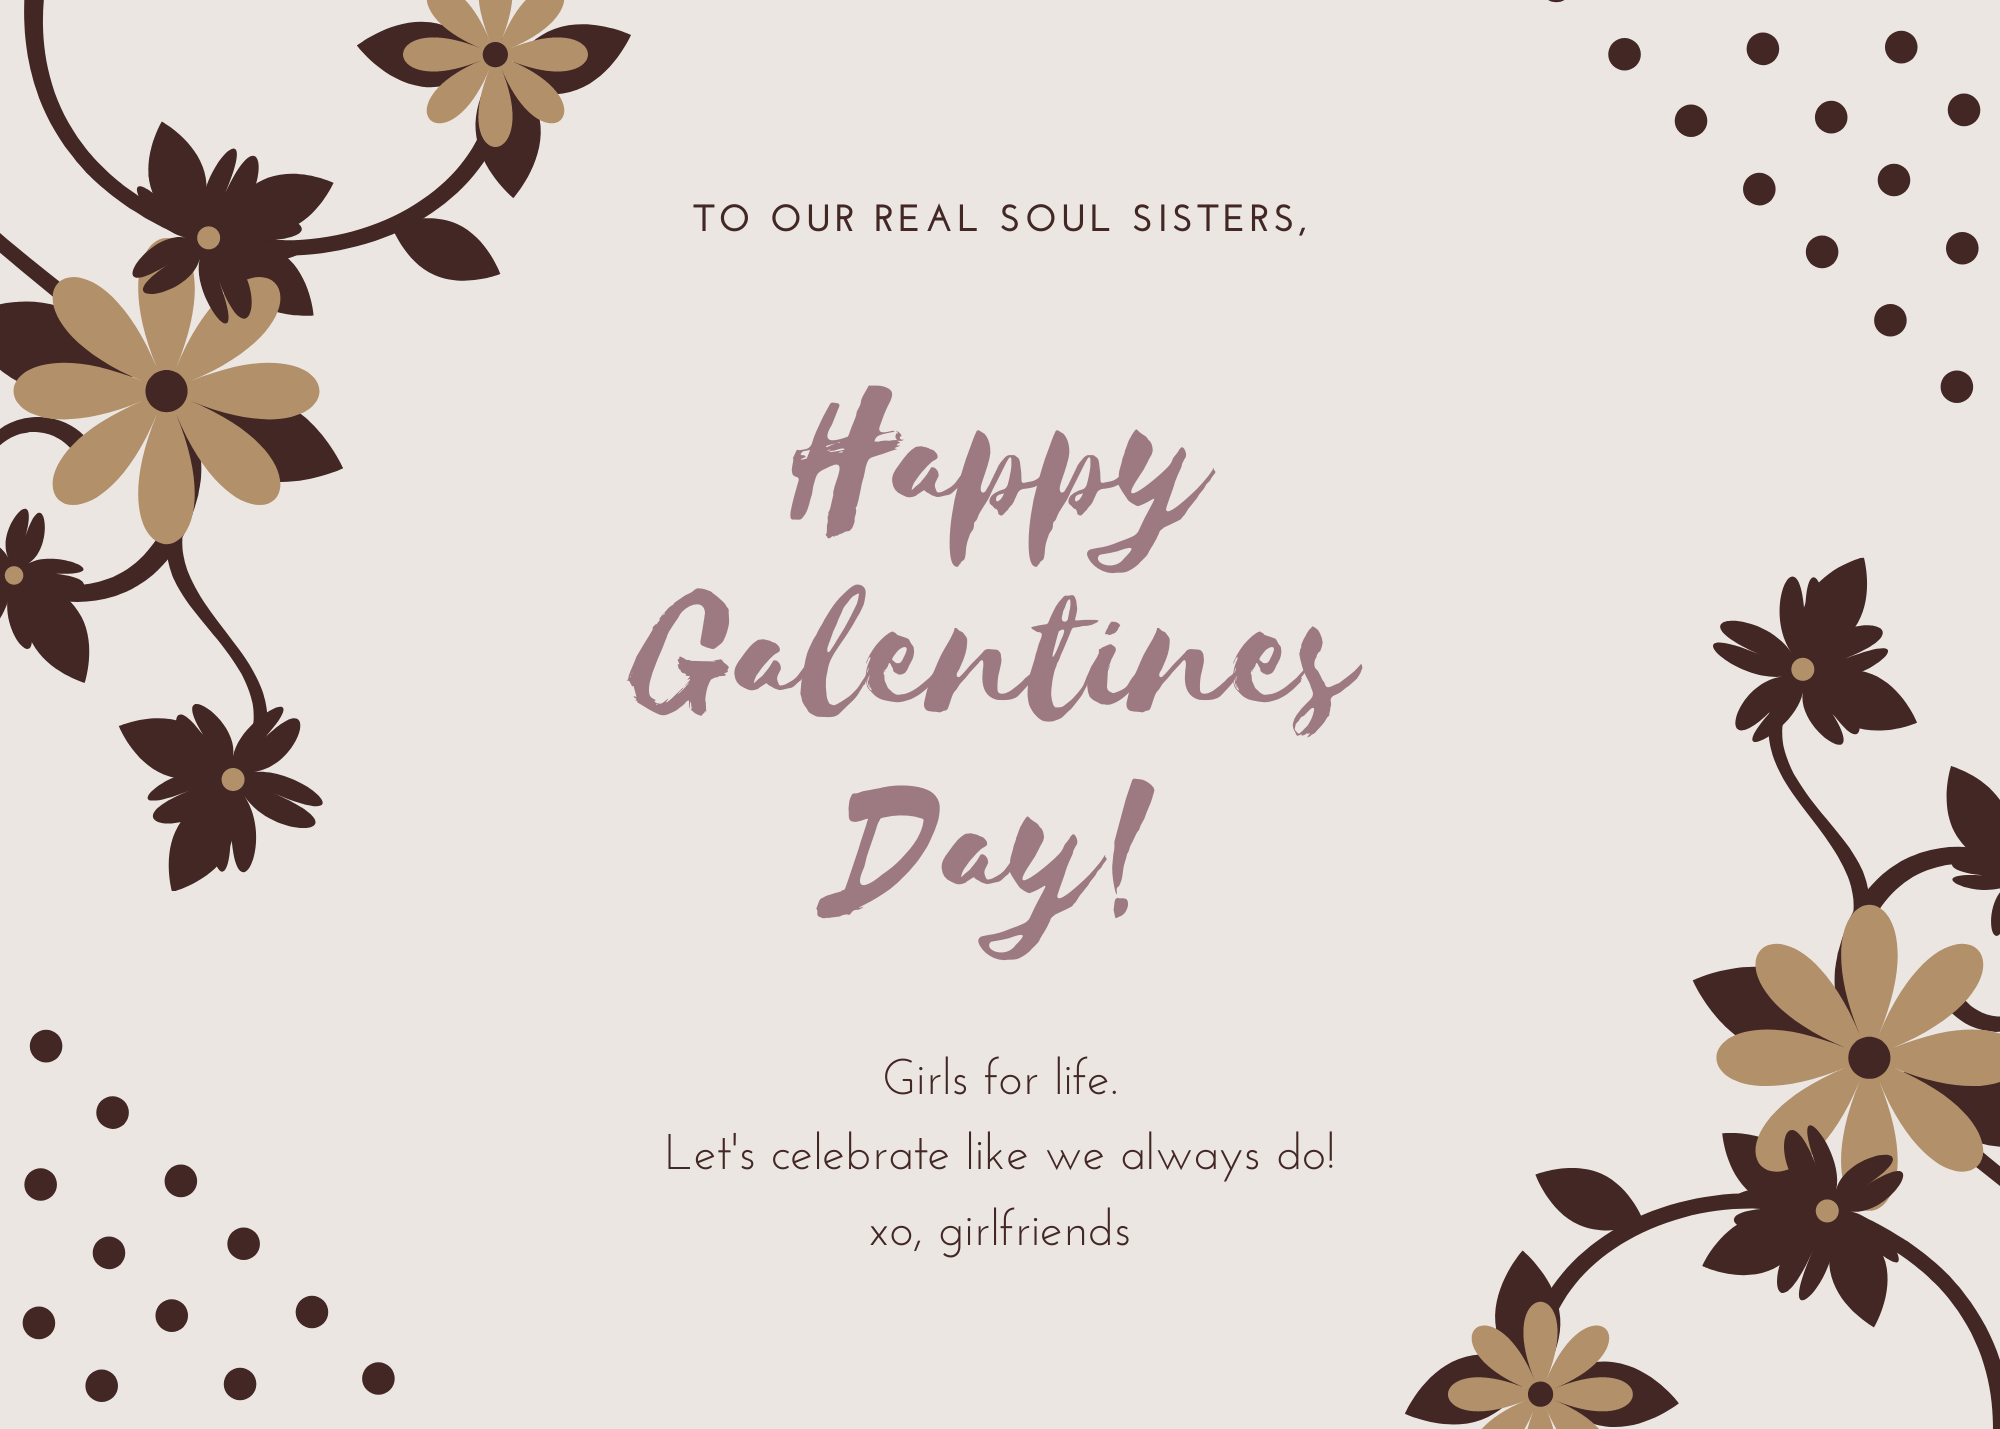 Gather the Girls for an Epic Galentine's Day 2023 Celebration